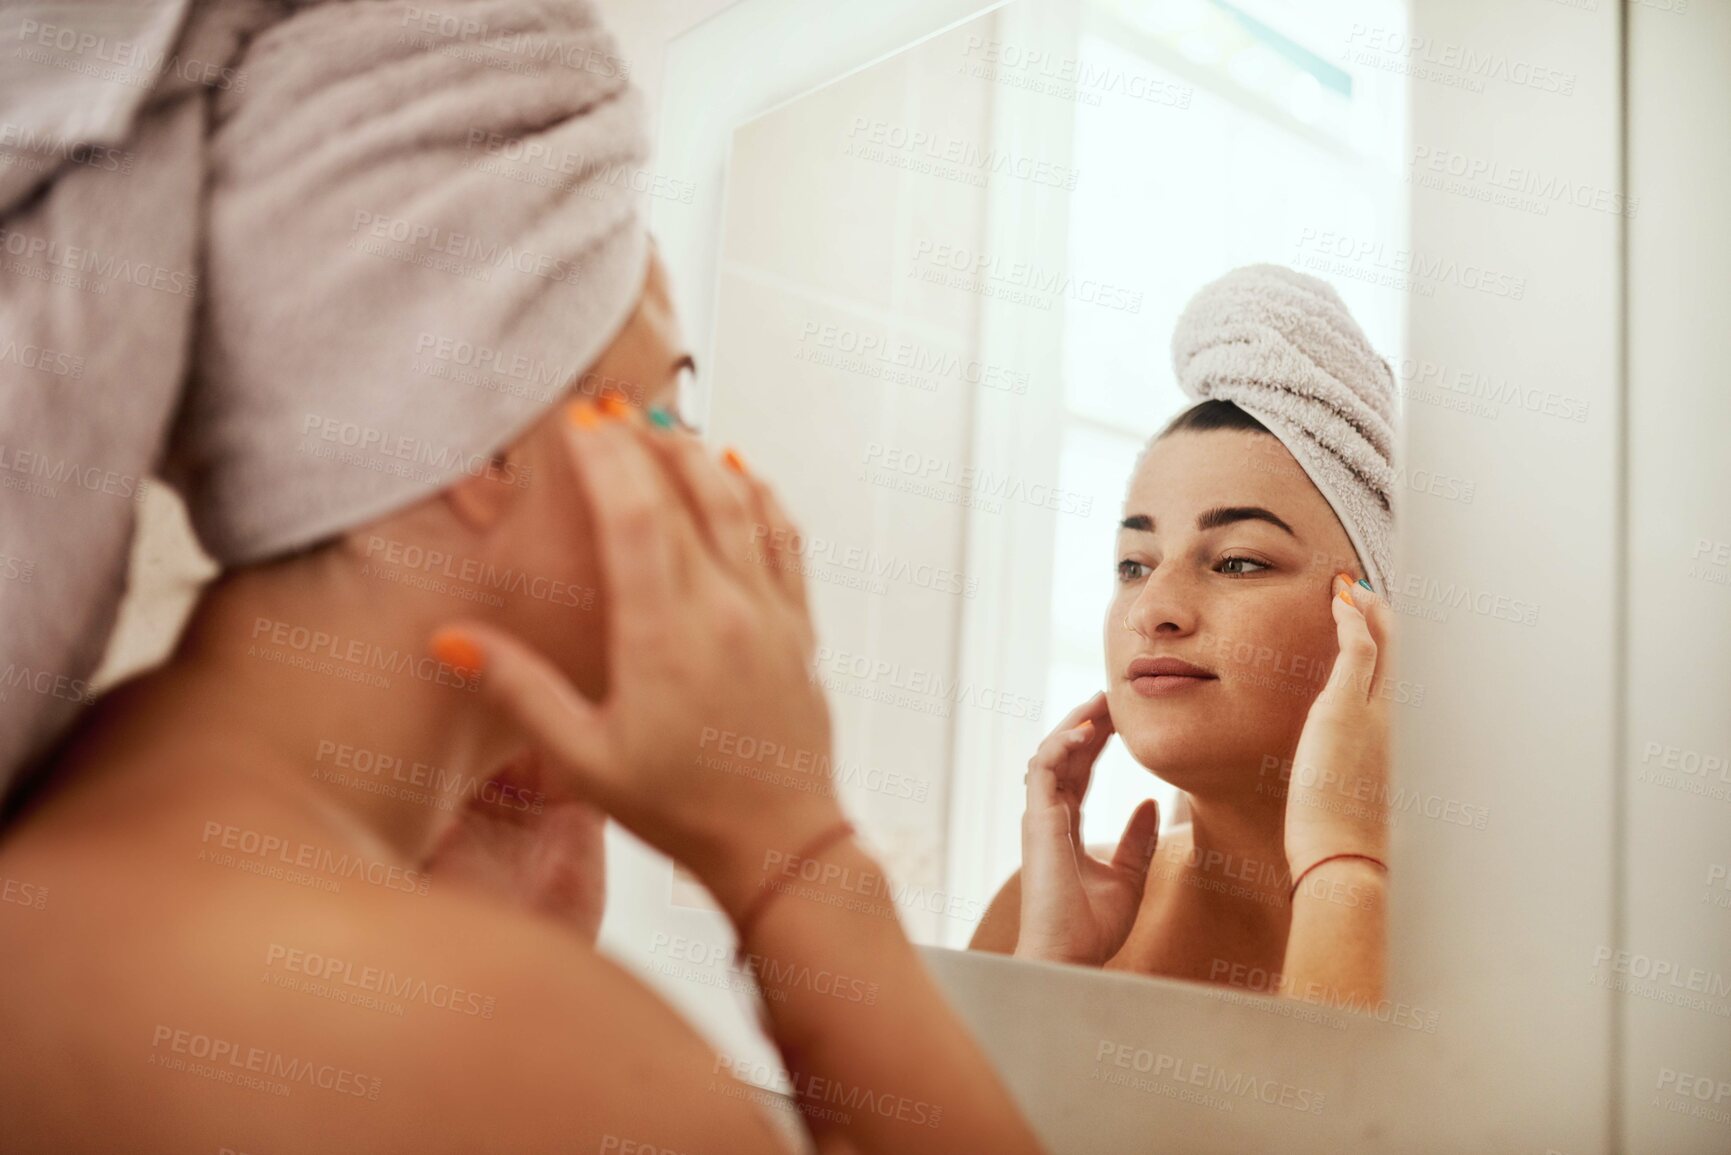 Buy stock photo Shot of an attractive young woman inspecting her face in the bathroom mirror